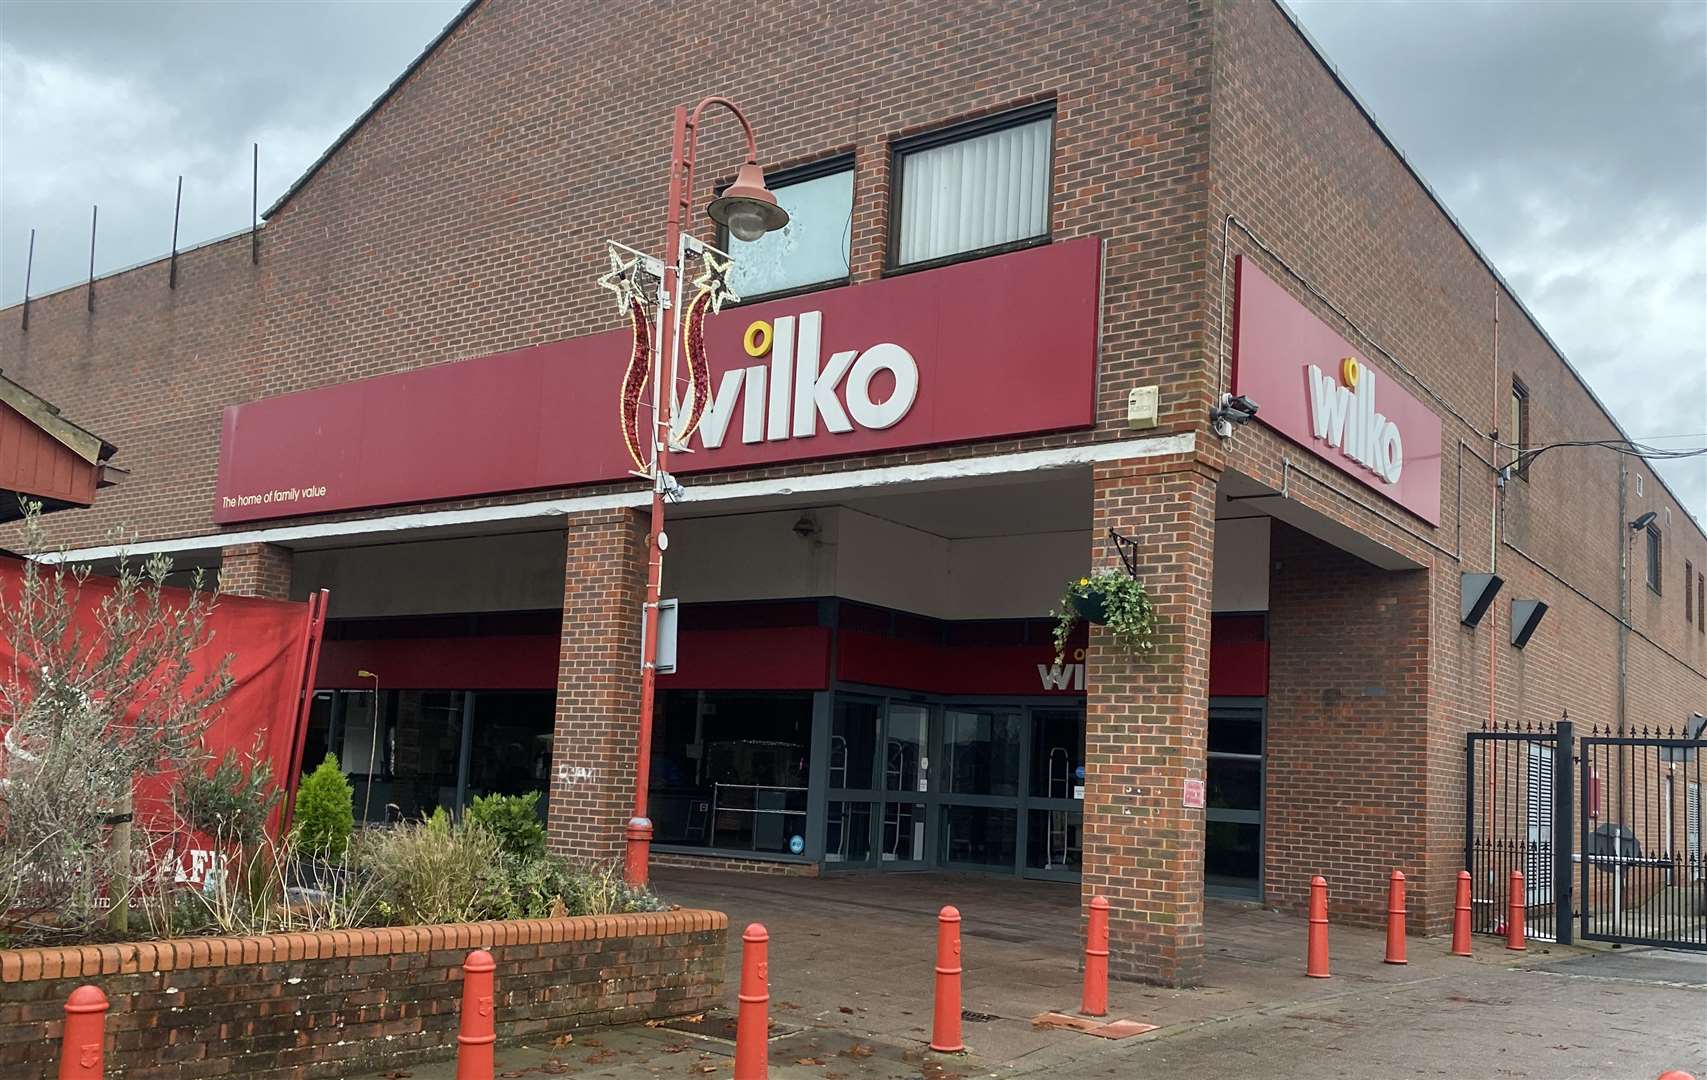 The store is taking over from the former Wilko